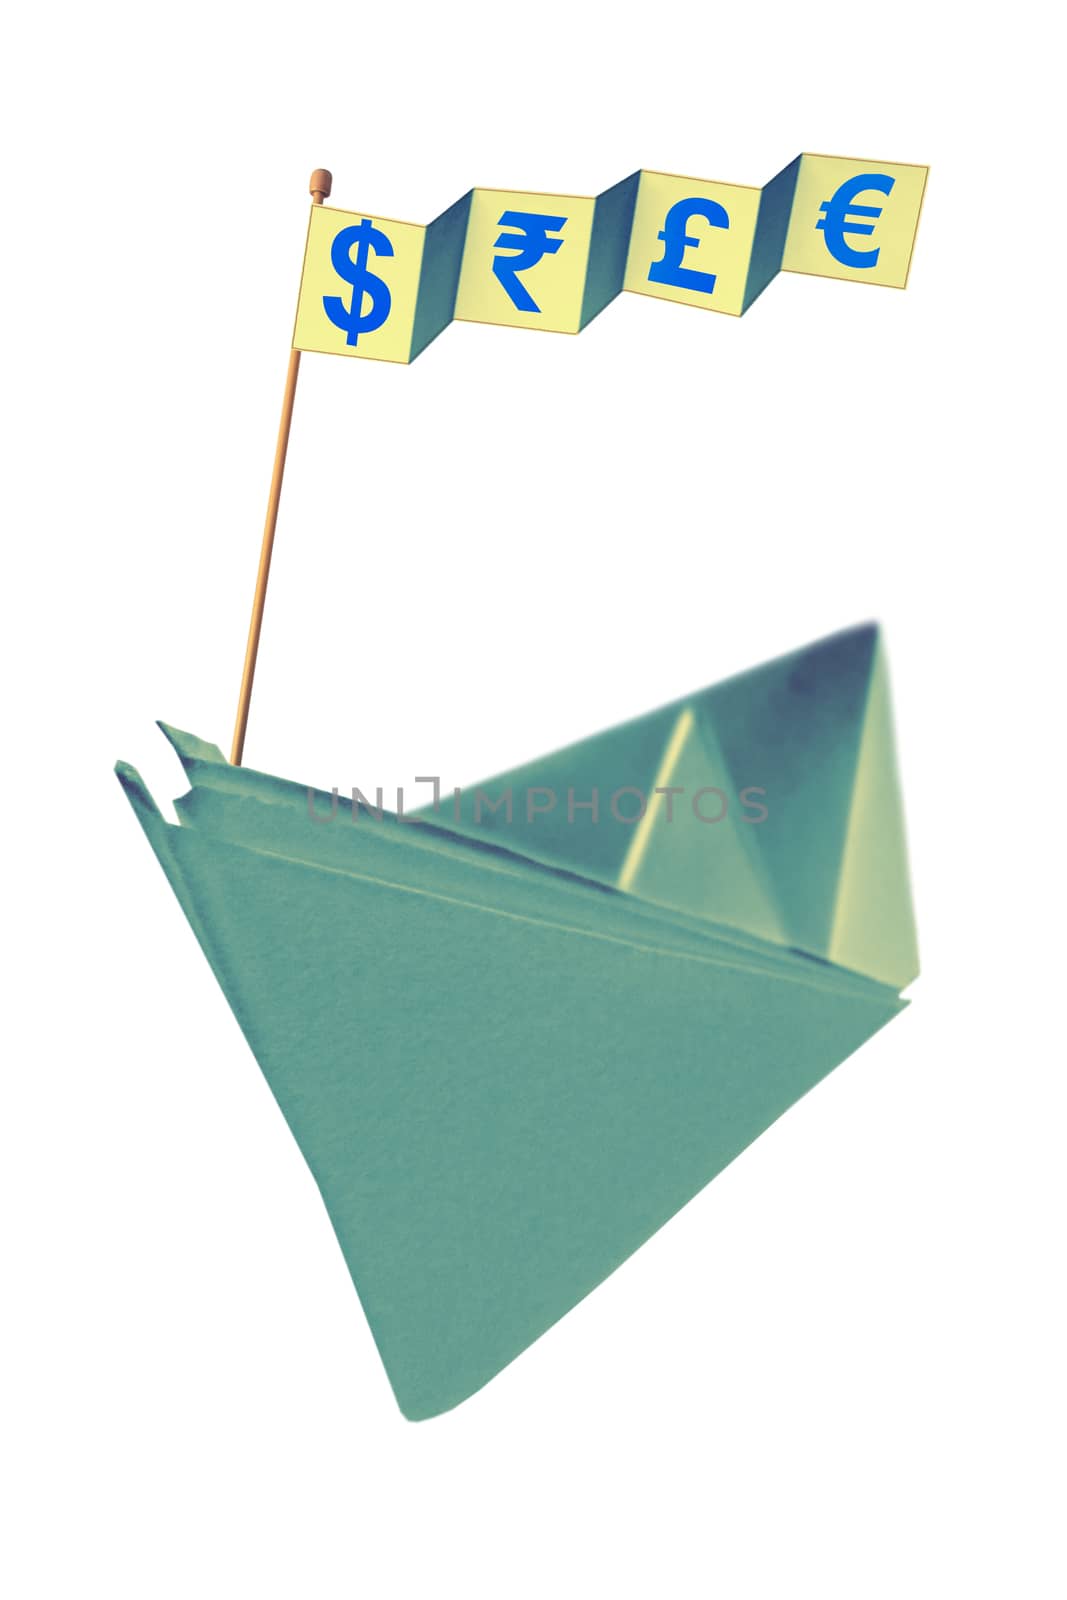 Origami paper boat with flag writing different currency signs